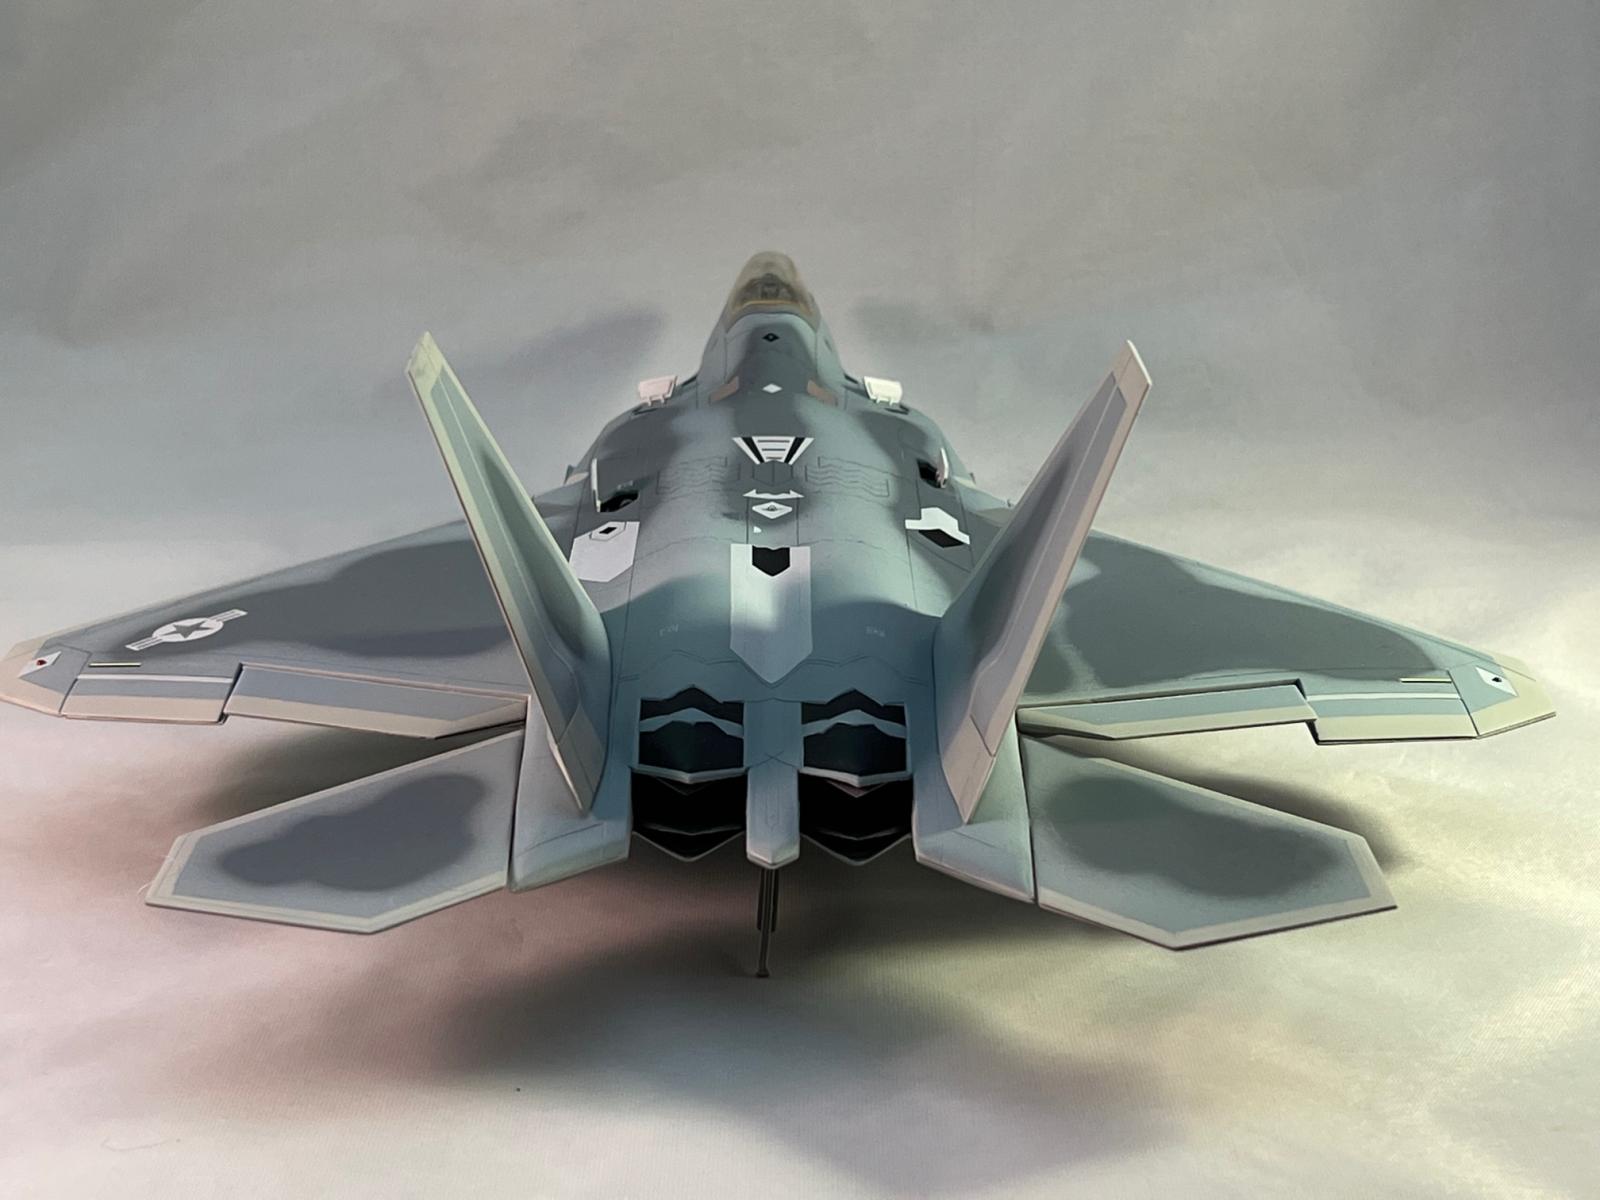 Revell 1/72 Lockheed Martin F-22A Raptor (03858) Color Guide